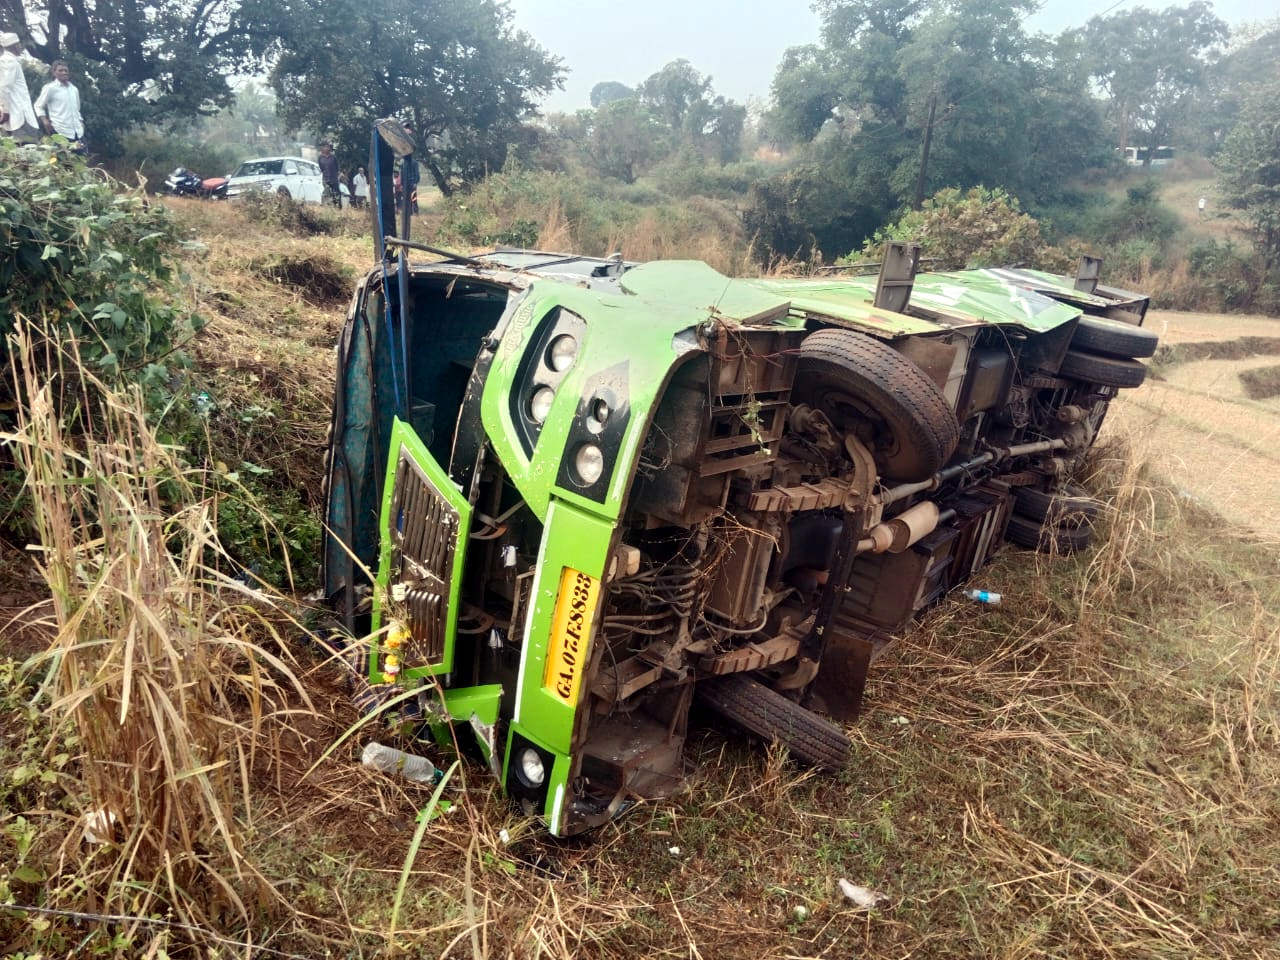 ﻿9 injured as minibus   from Margao overturns   in Khanapur village